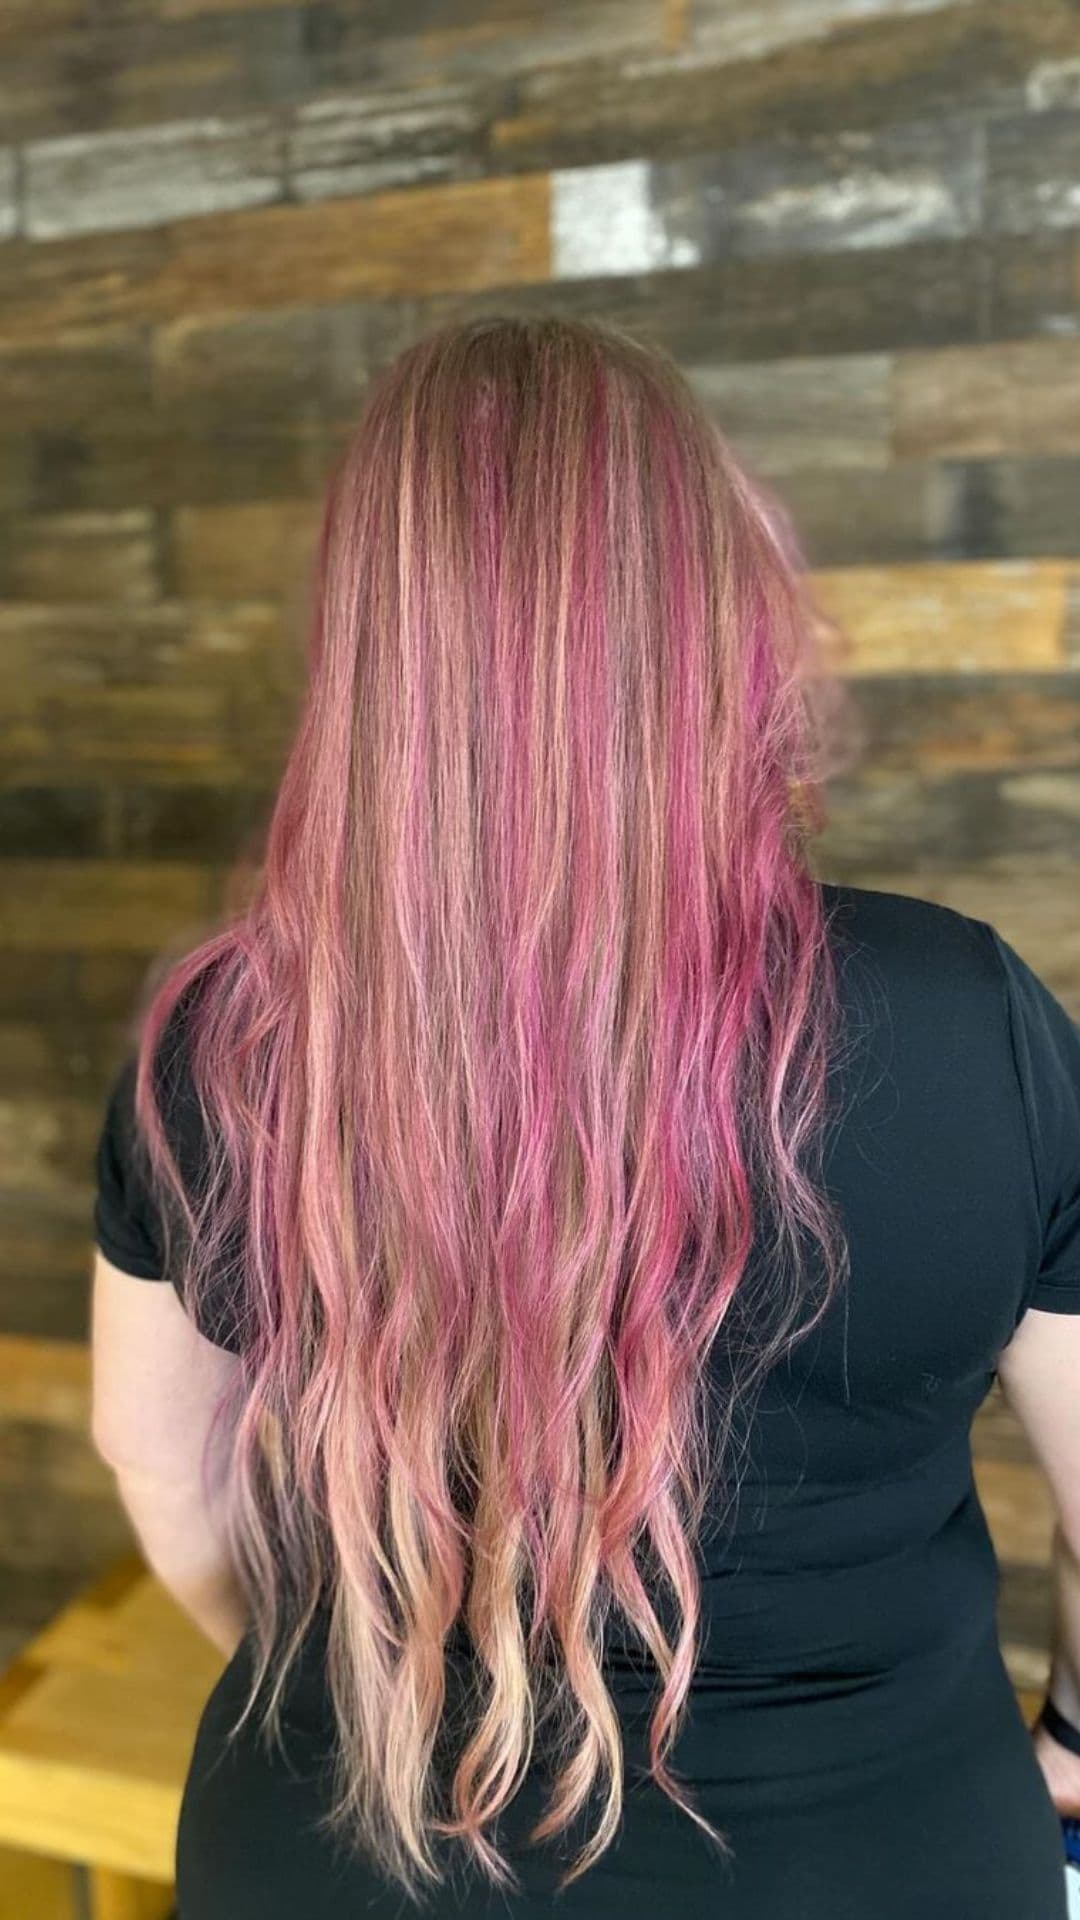 A woman with long hair and pink highlights.